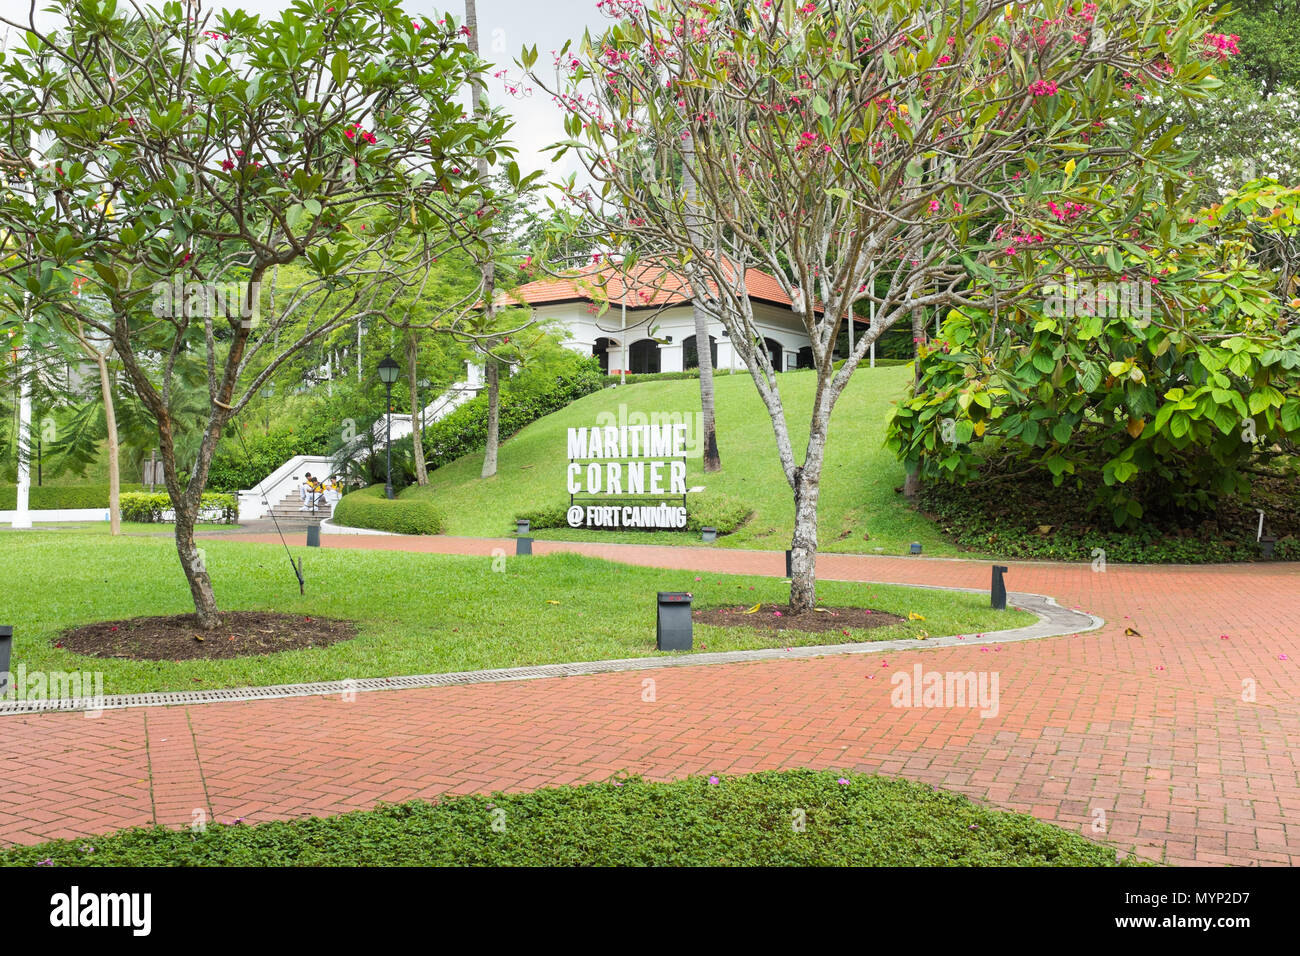 Maritime Corner at Fort Canning Park in Singapore Stock Photo